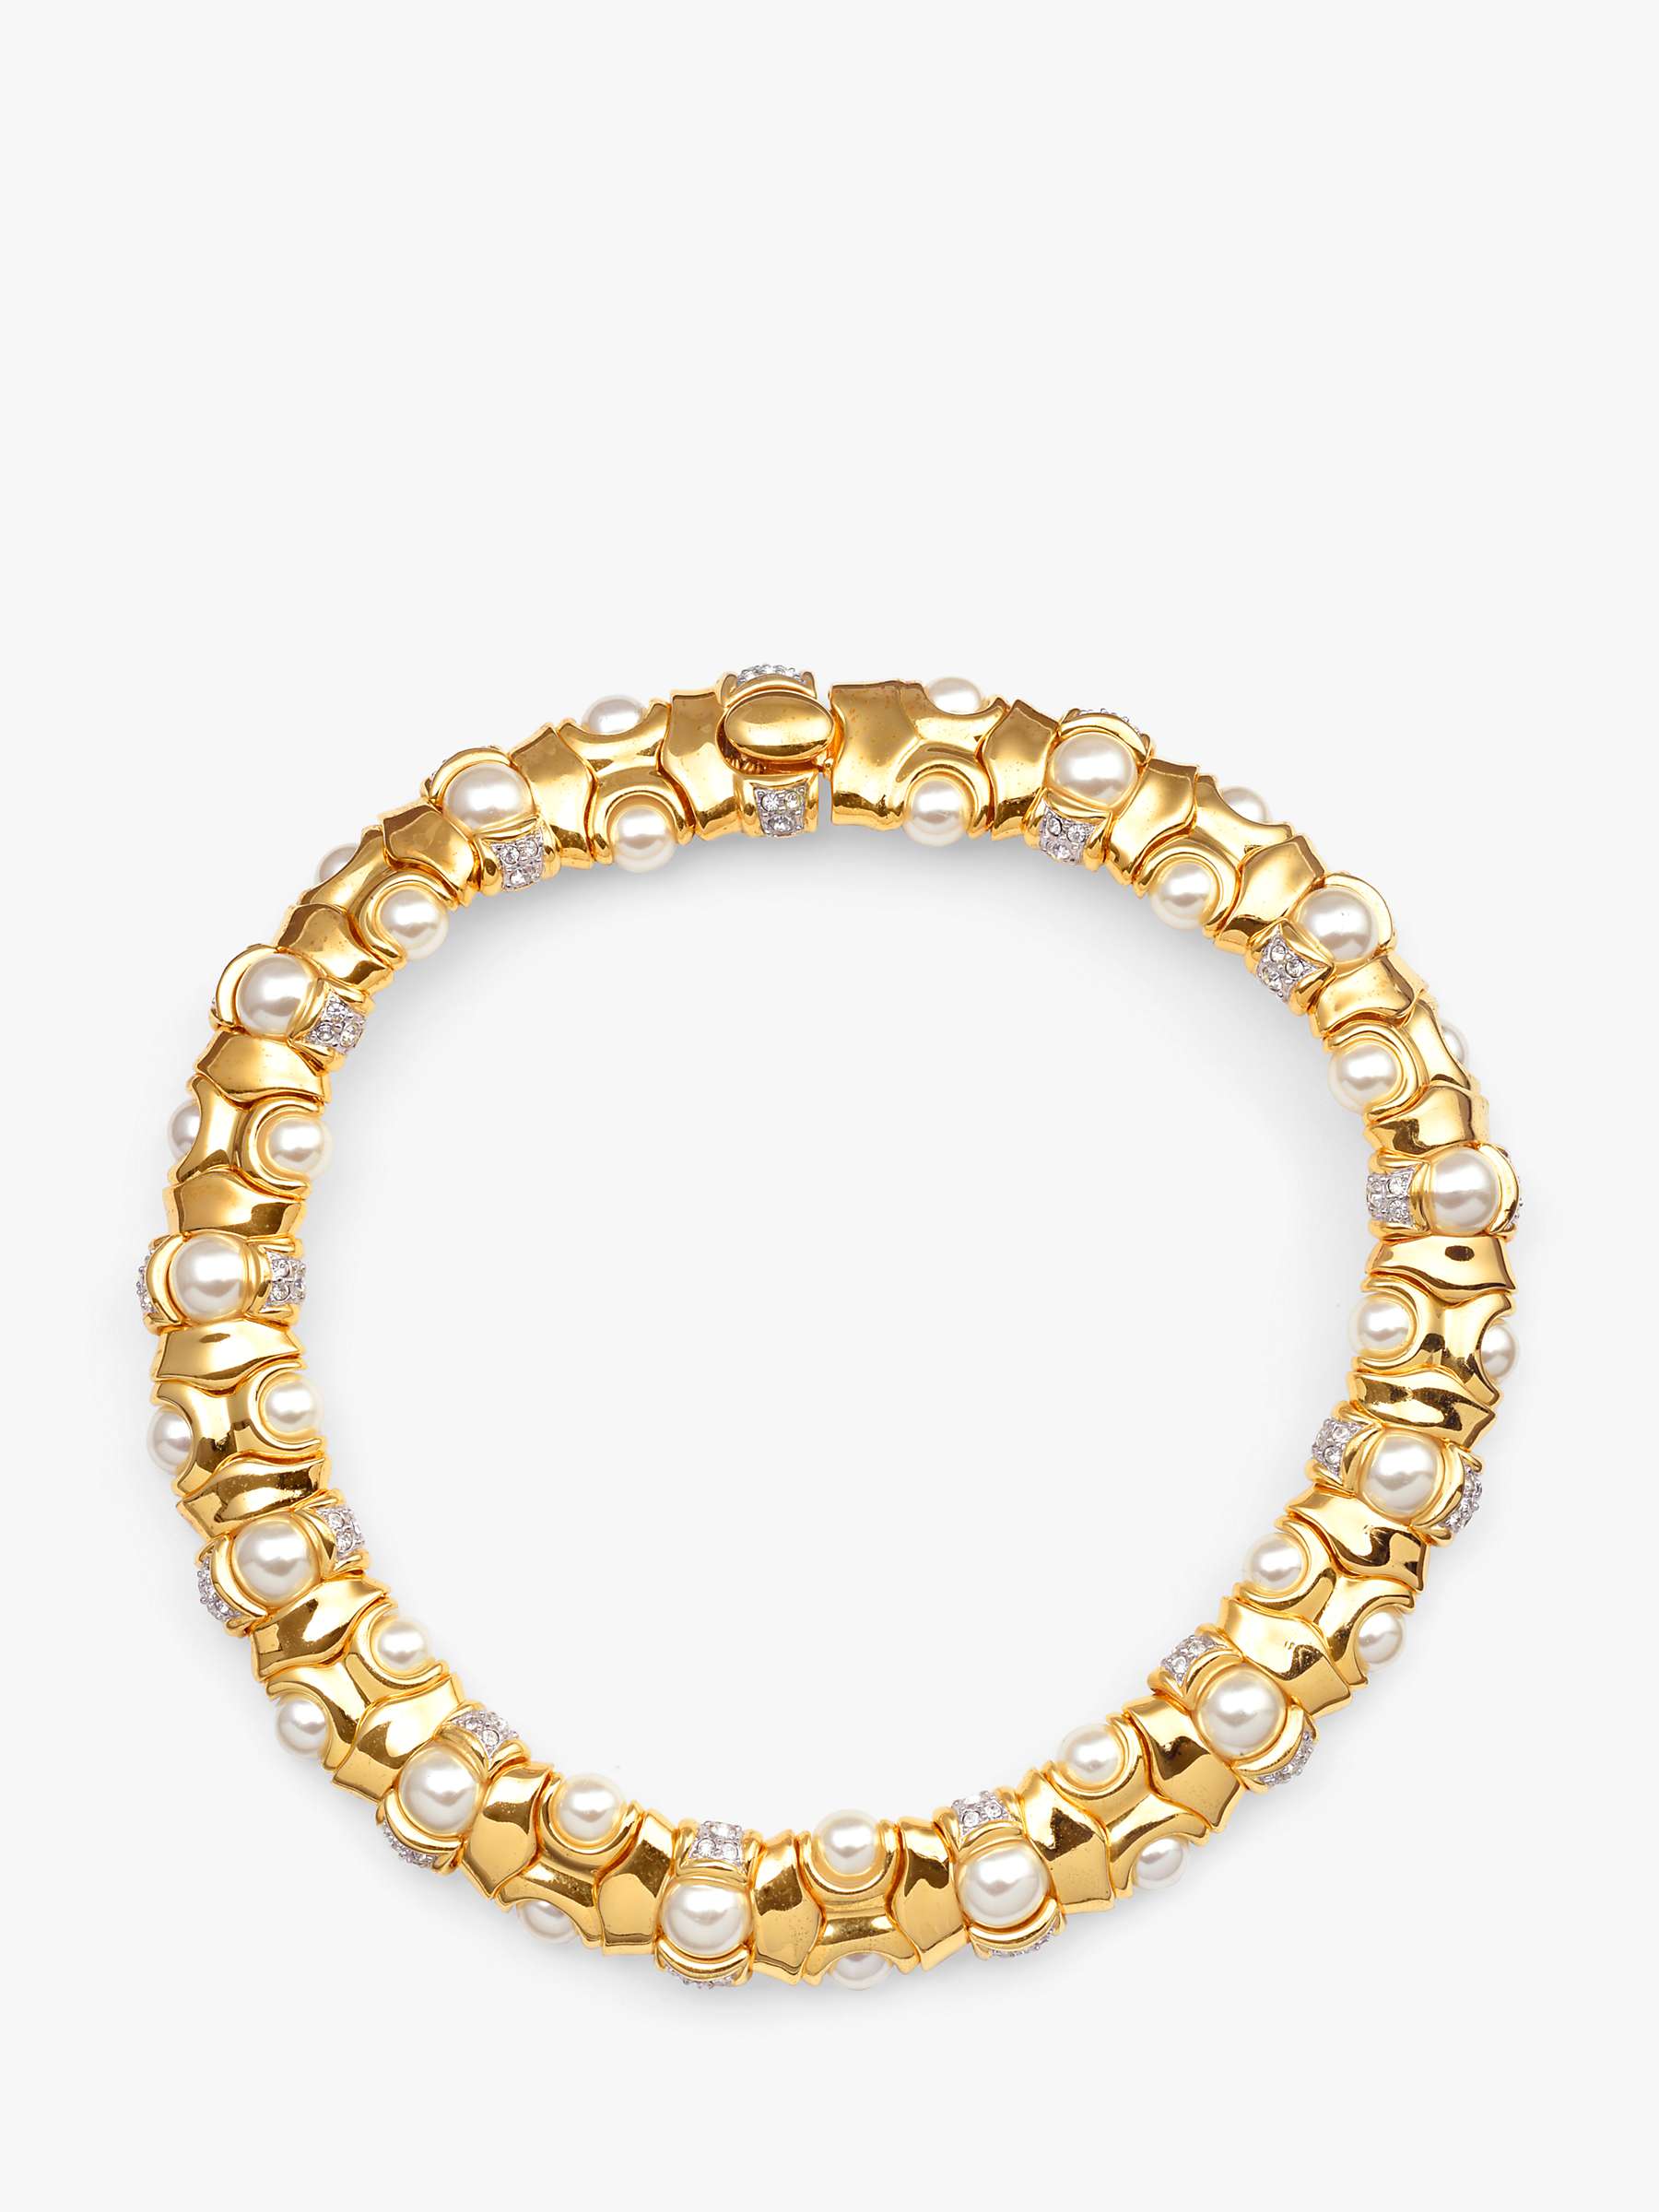 Buy Eclectica Vintage 22ct Gold Plated Faux Pearl & Swarovski Crystal Collar Necklace, Gold Online at johnlewis.com